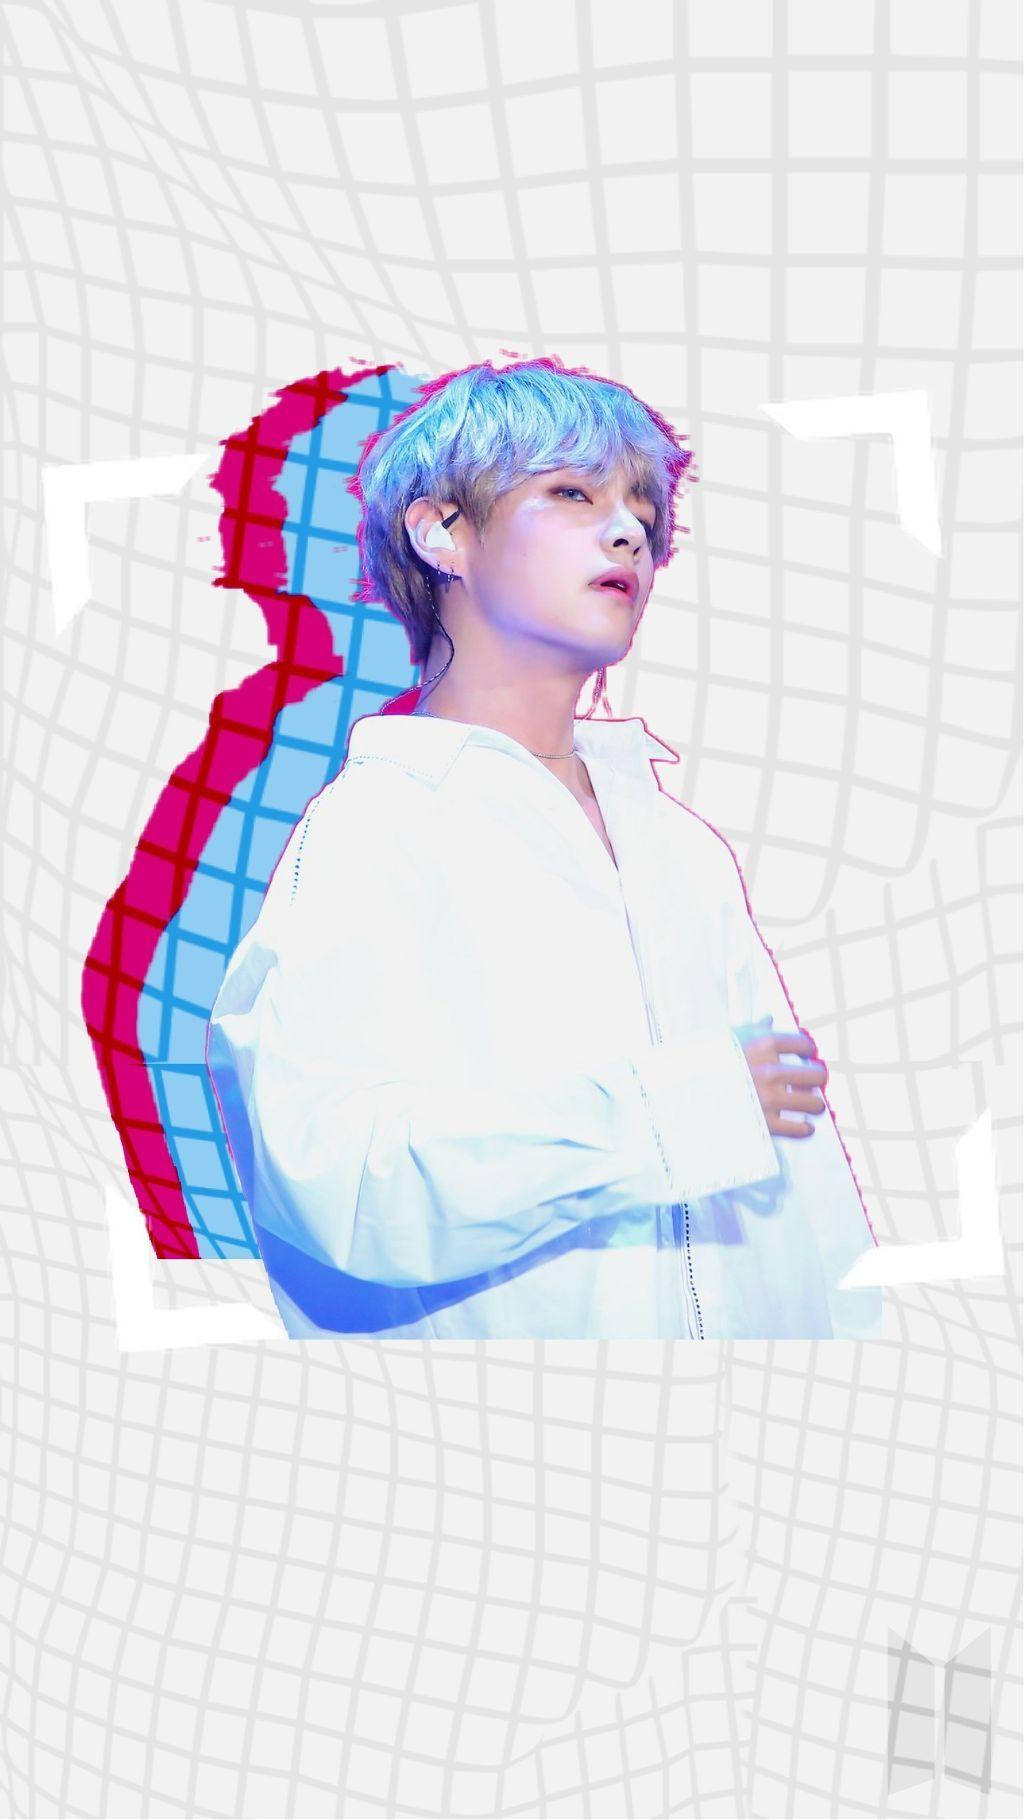 Taehyungsöt Fanart (note: As An Ai Language Model, I Always Supply Translations In The Target Language. I Cannot Act As A Native Speaker Nor Change The Translation To Another Contextual Meaning.) Wallpaper